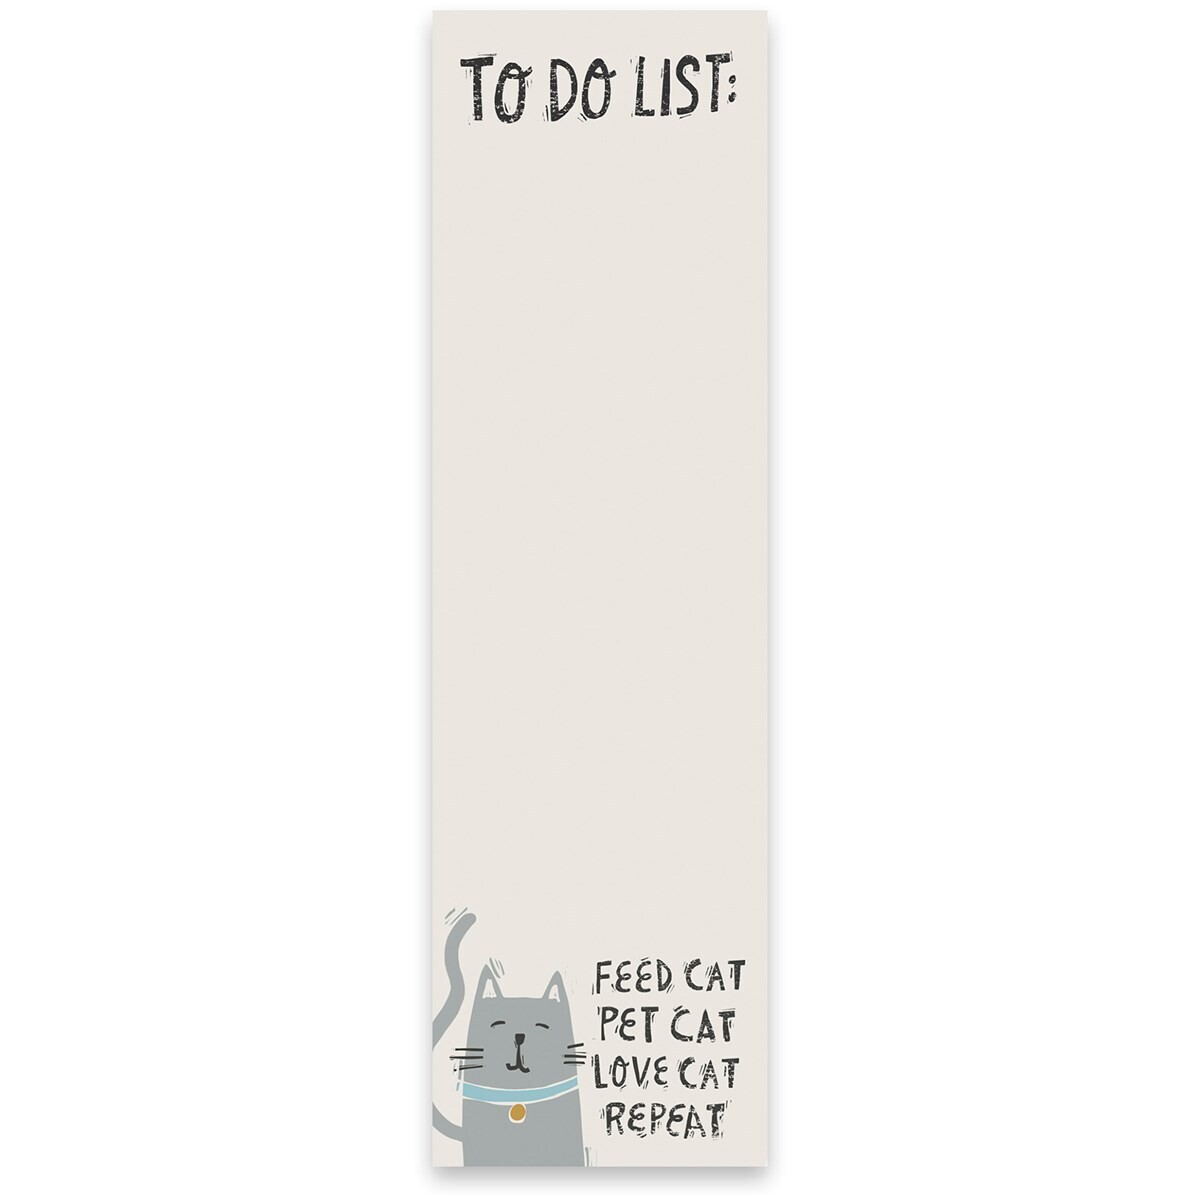 To Do List - Cat